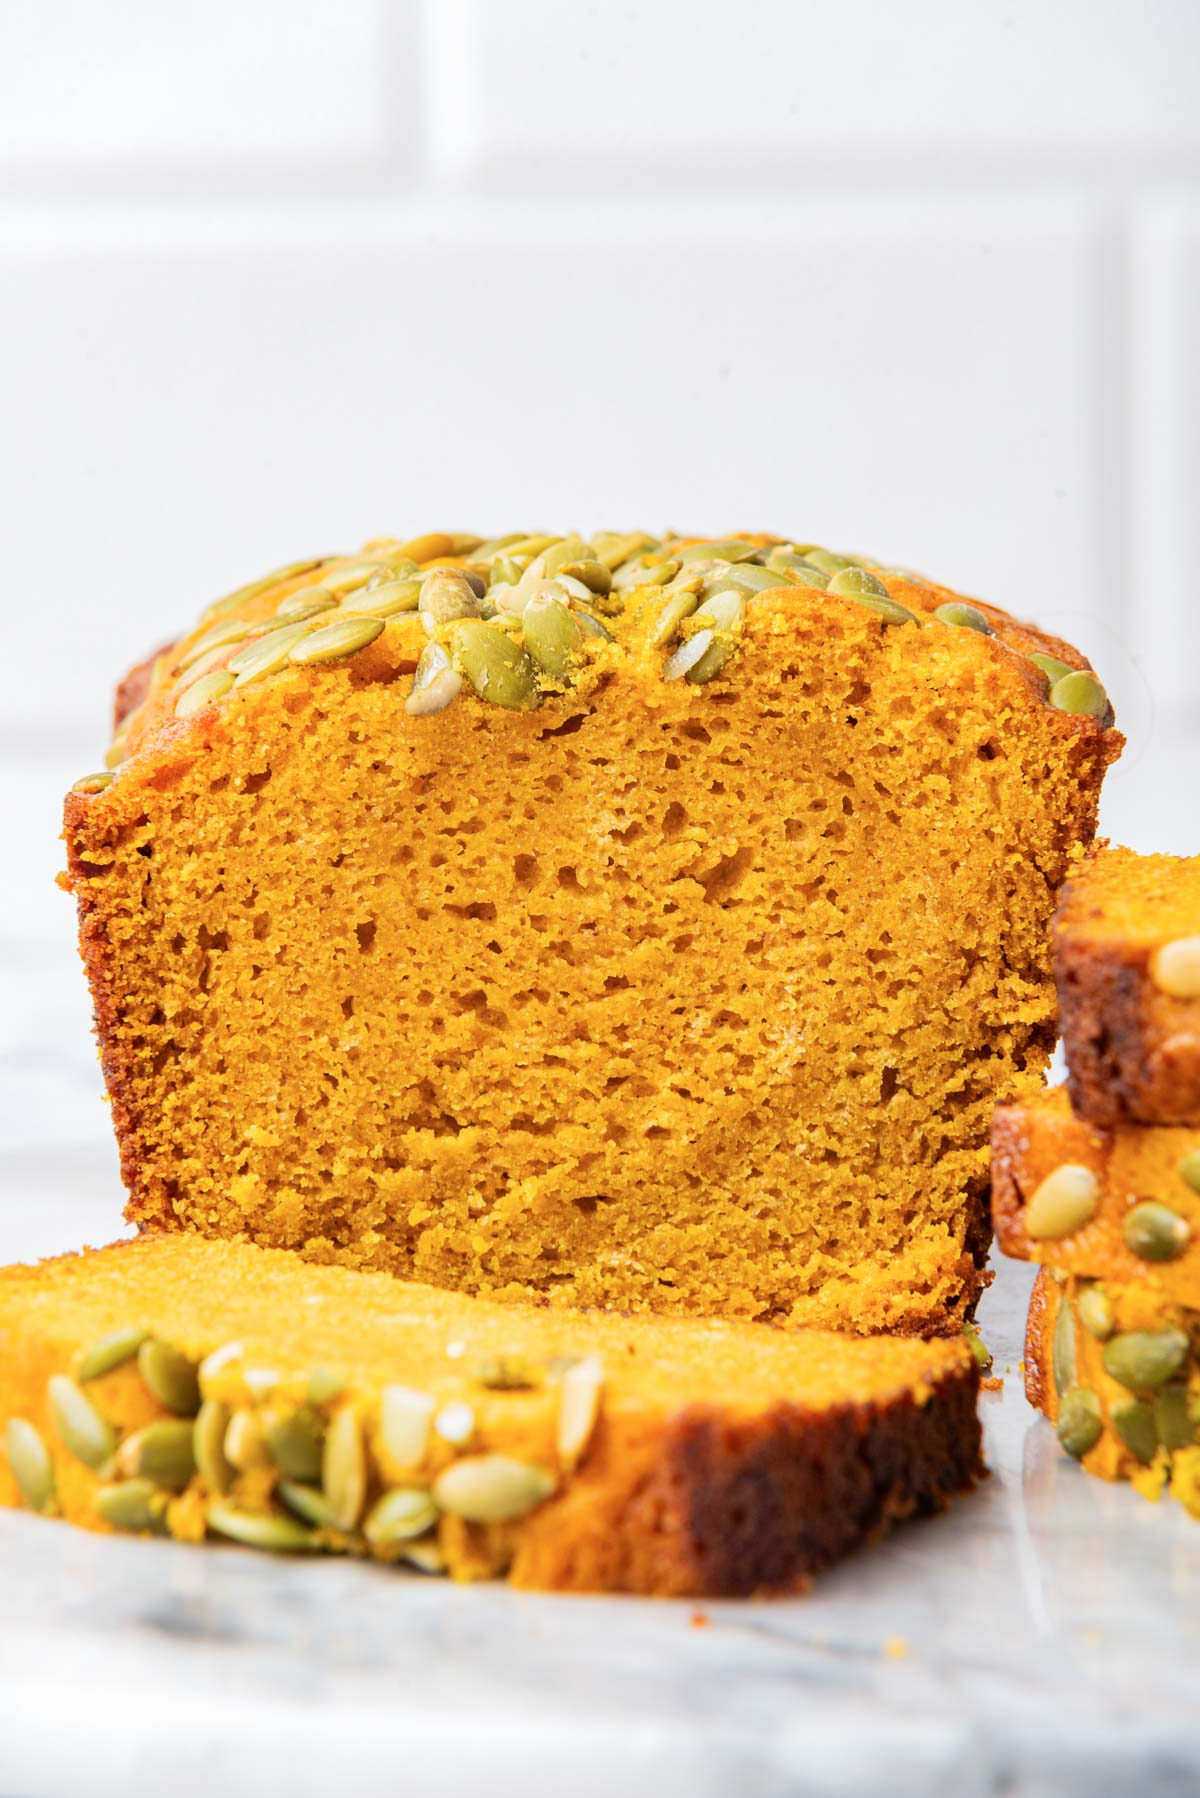 A close-up view of a sliced loaf of bread topped with pumpkin seeds, showing a dense and moist texture.